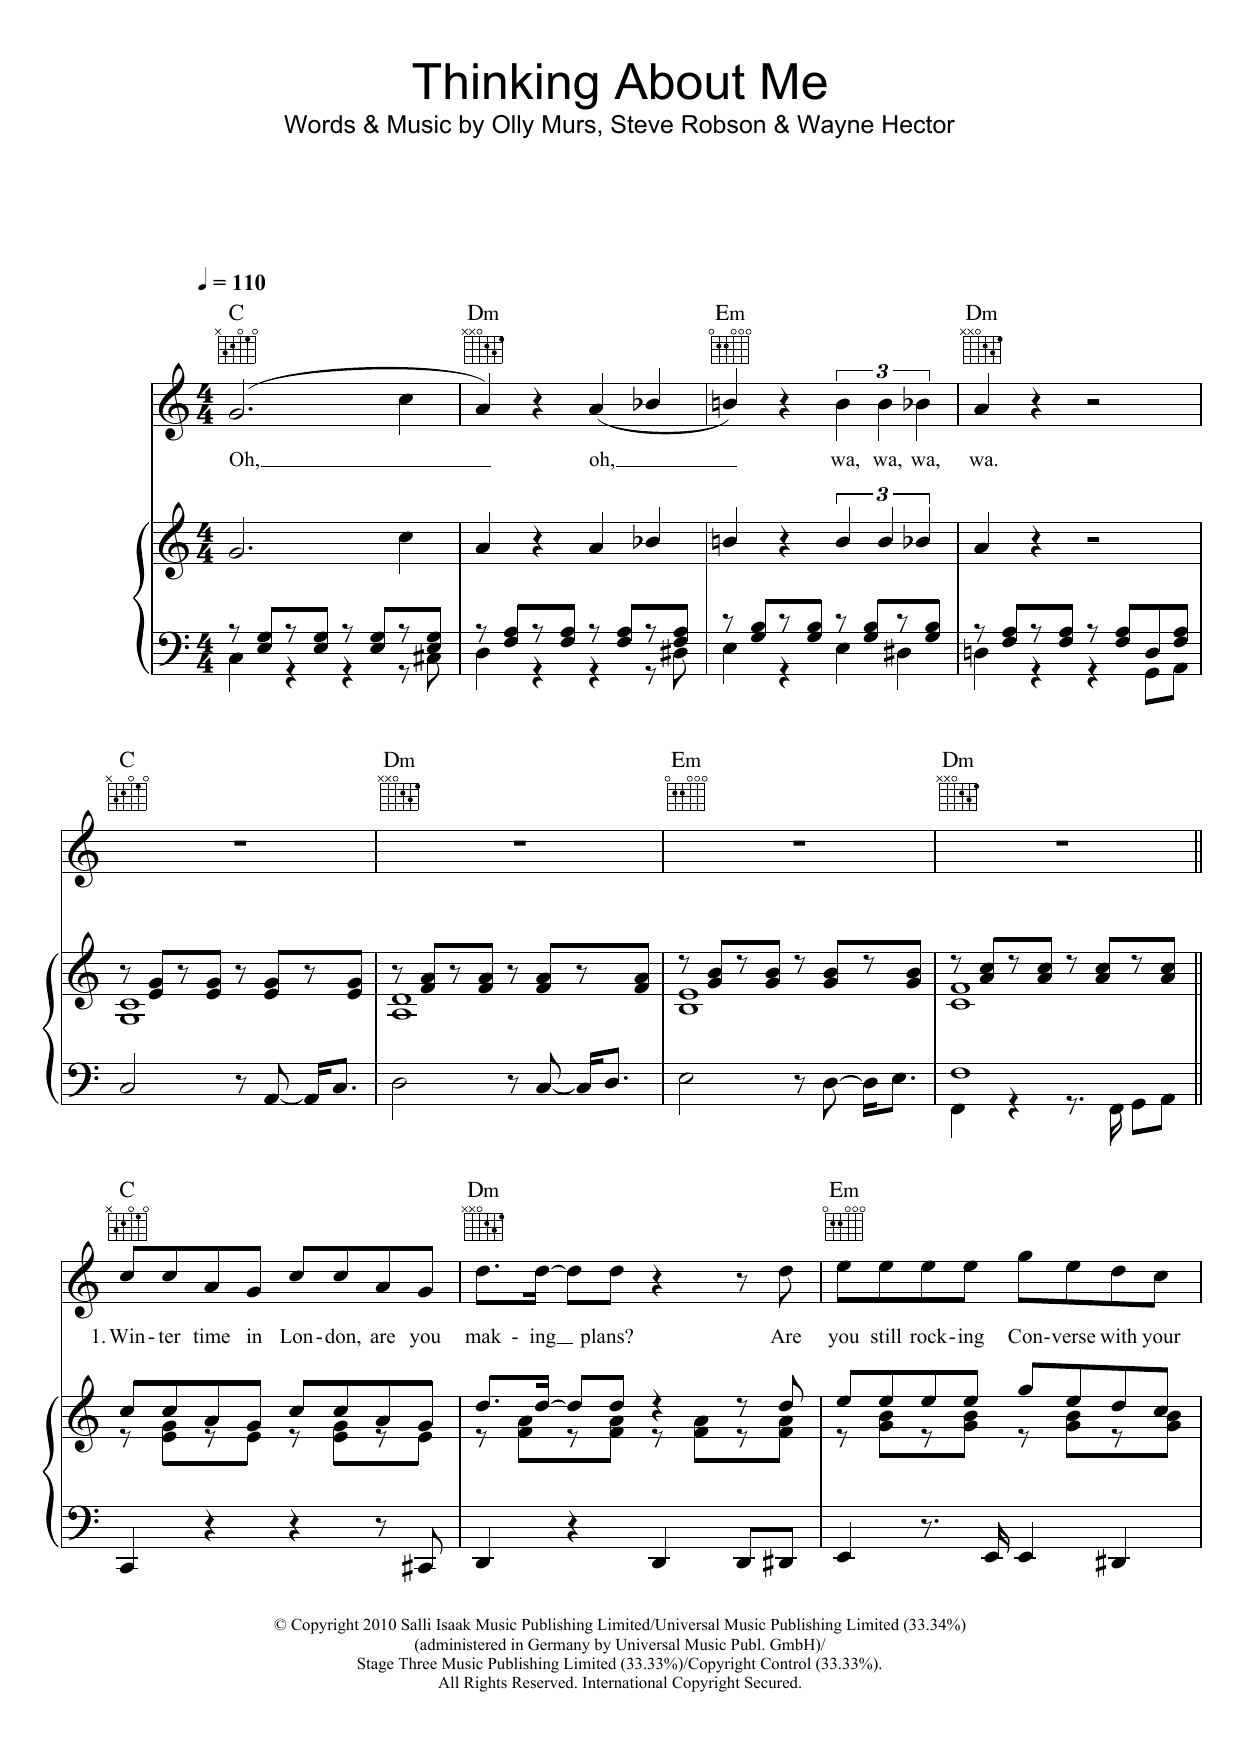 Download Olly Murs Thinking Of Me Sheet Music